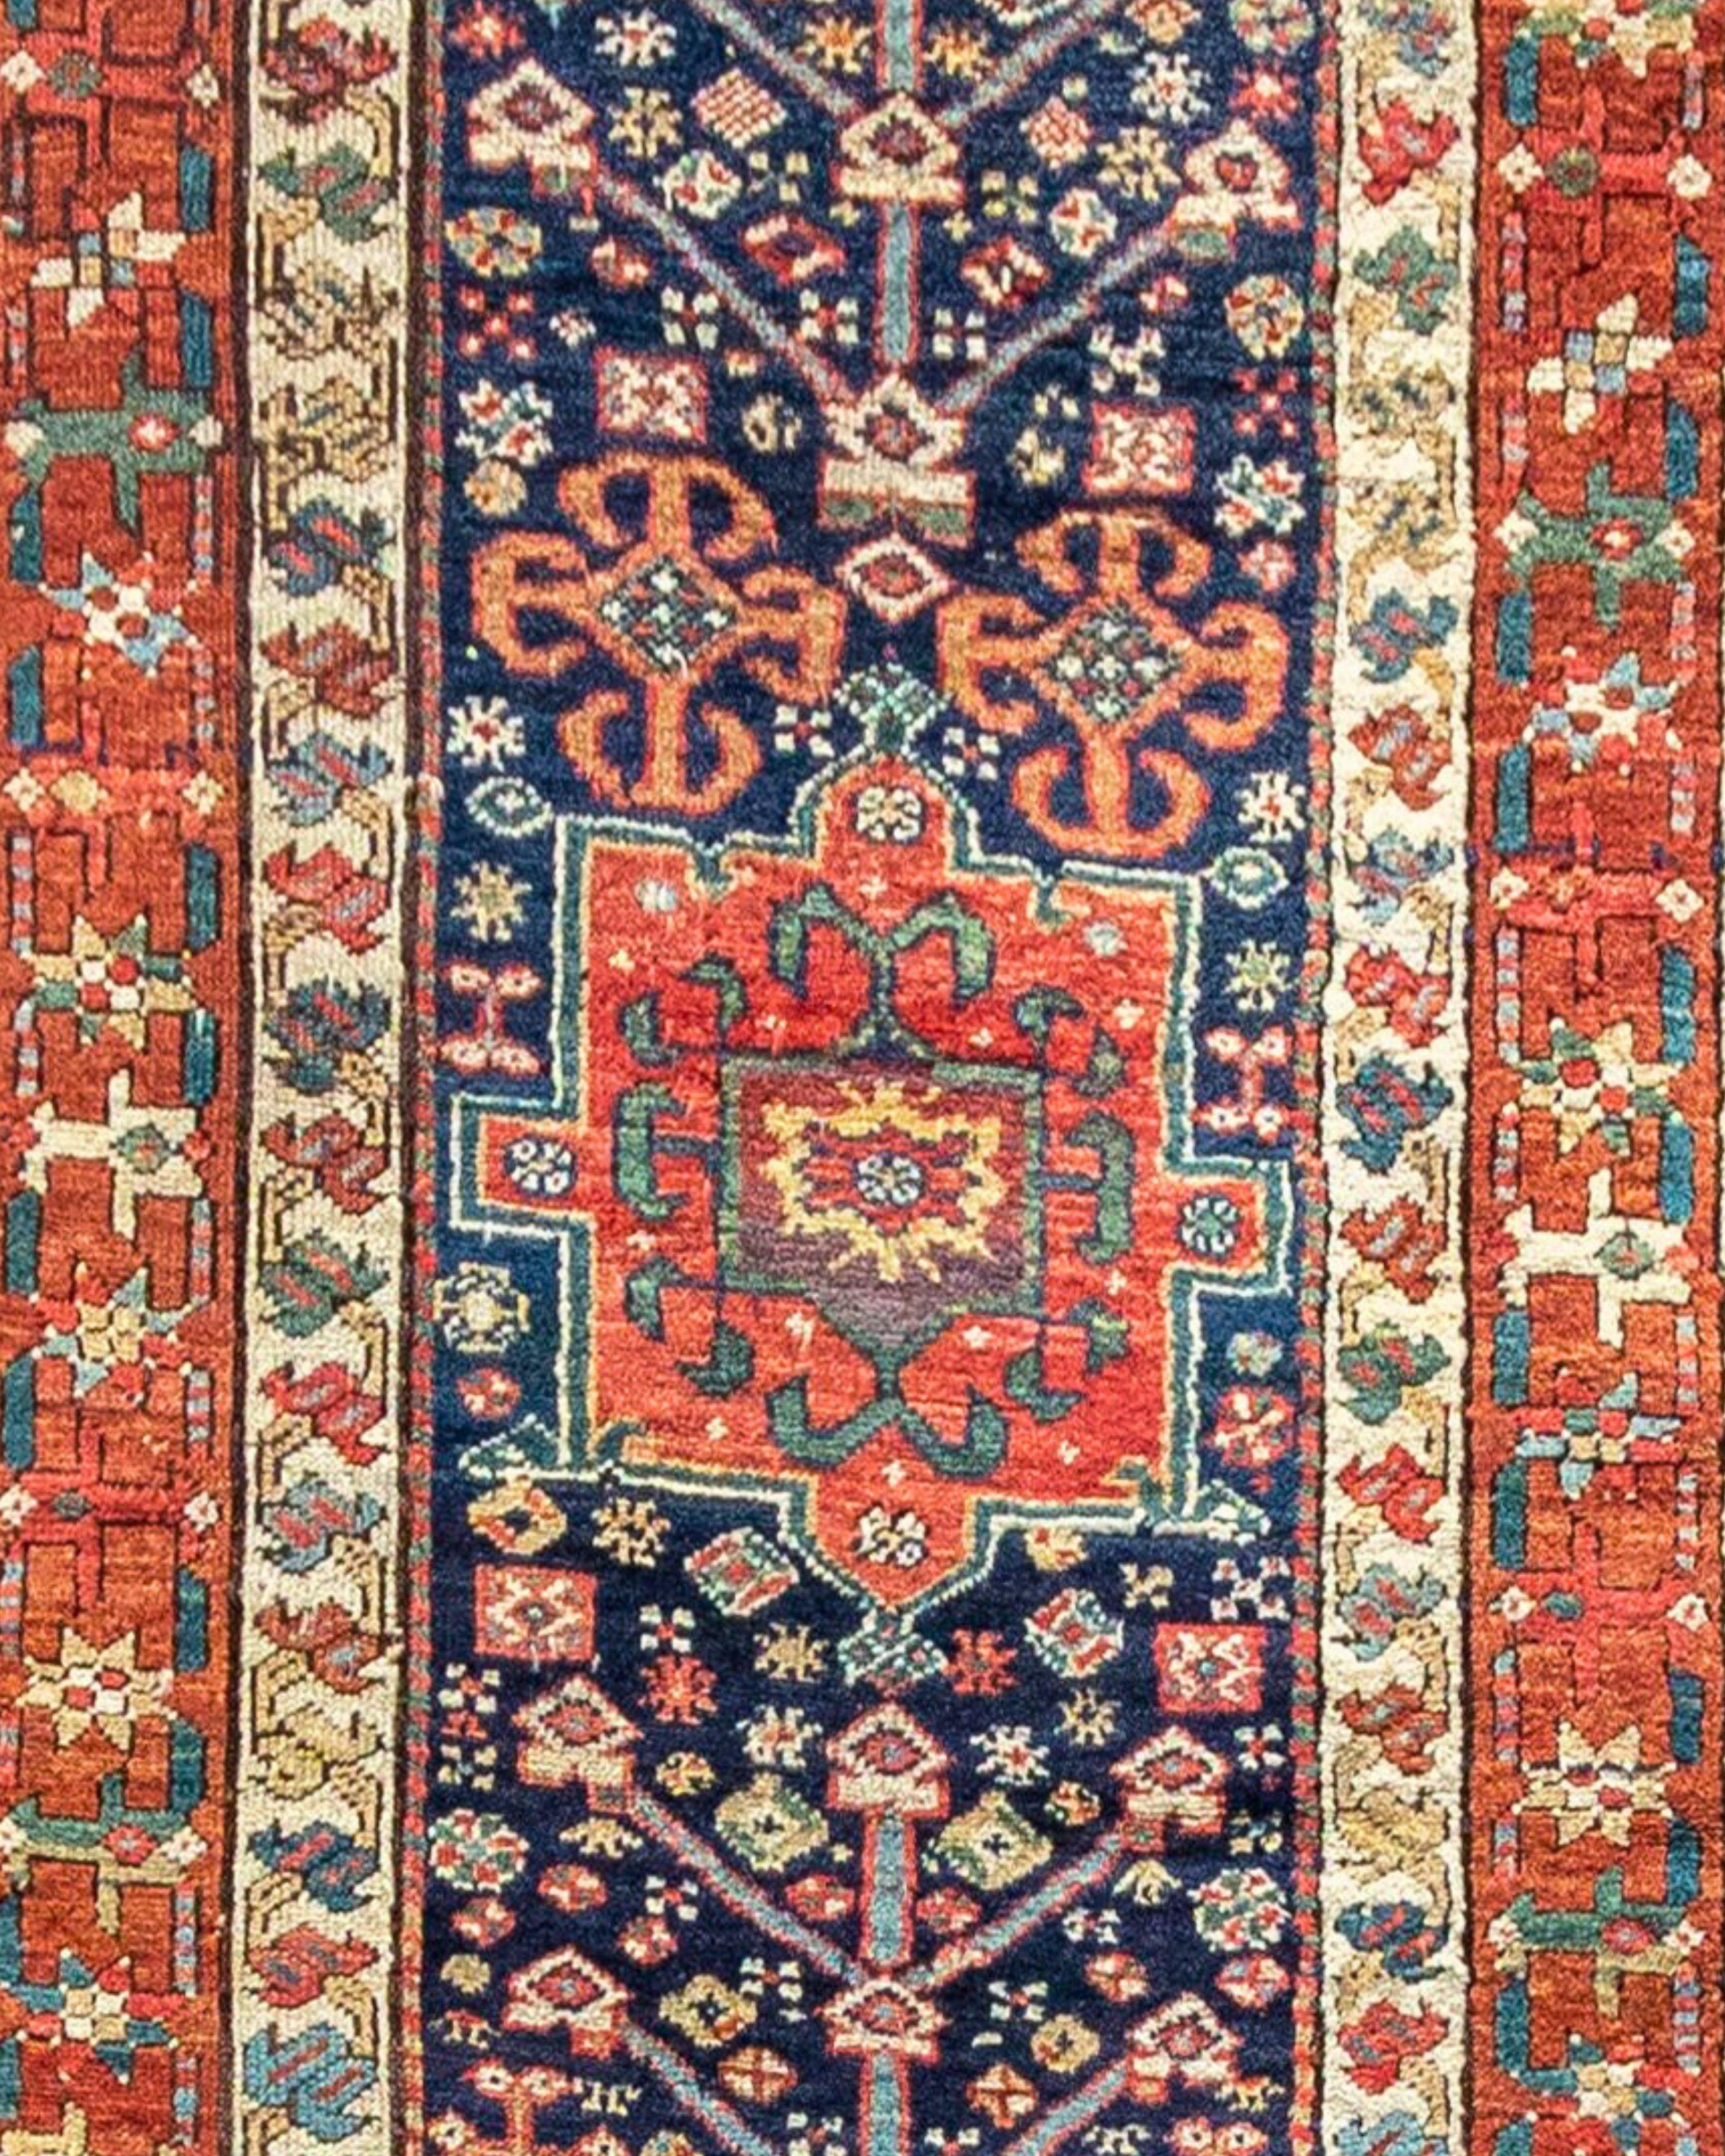 Antique Persian Karadagh Runner Runner Rug, 19th Century

Good condition with some small areas requiring re-knotting. Sold as is, repair quote on request.

Additional Information:
Dimensions: 3'3